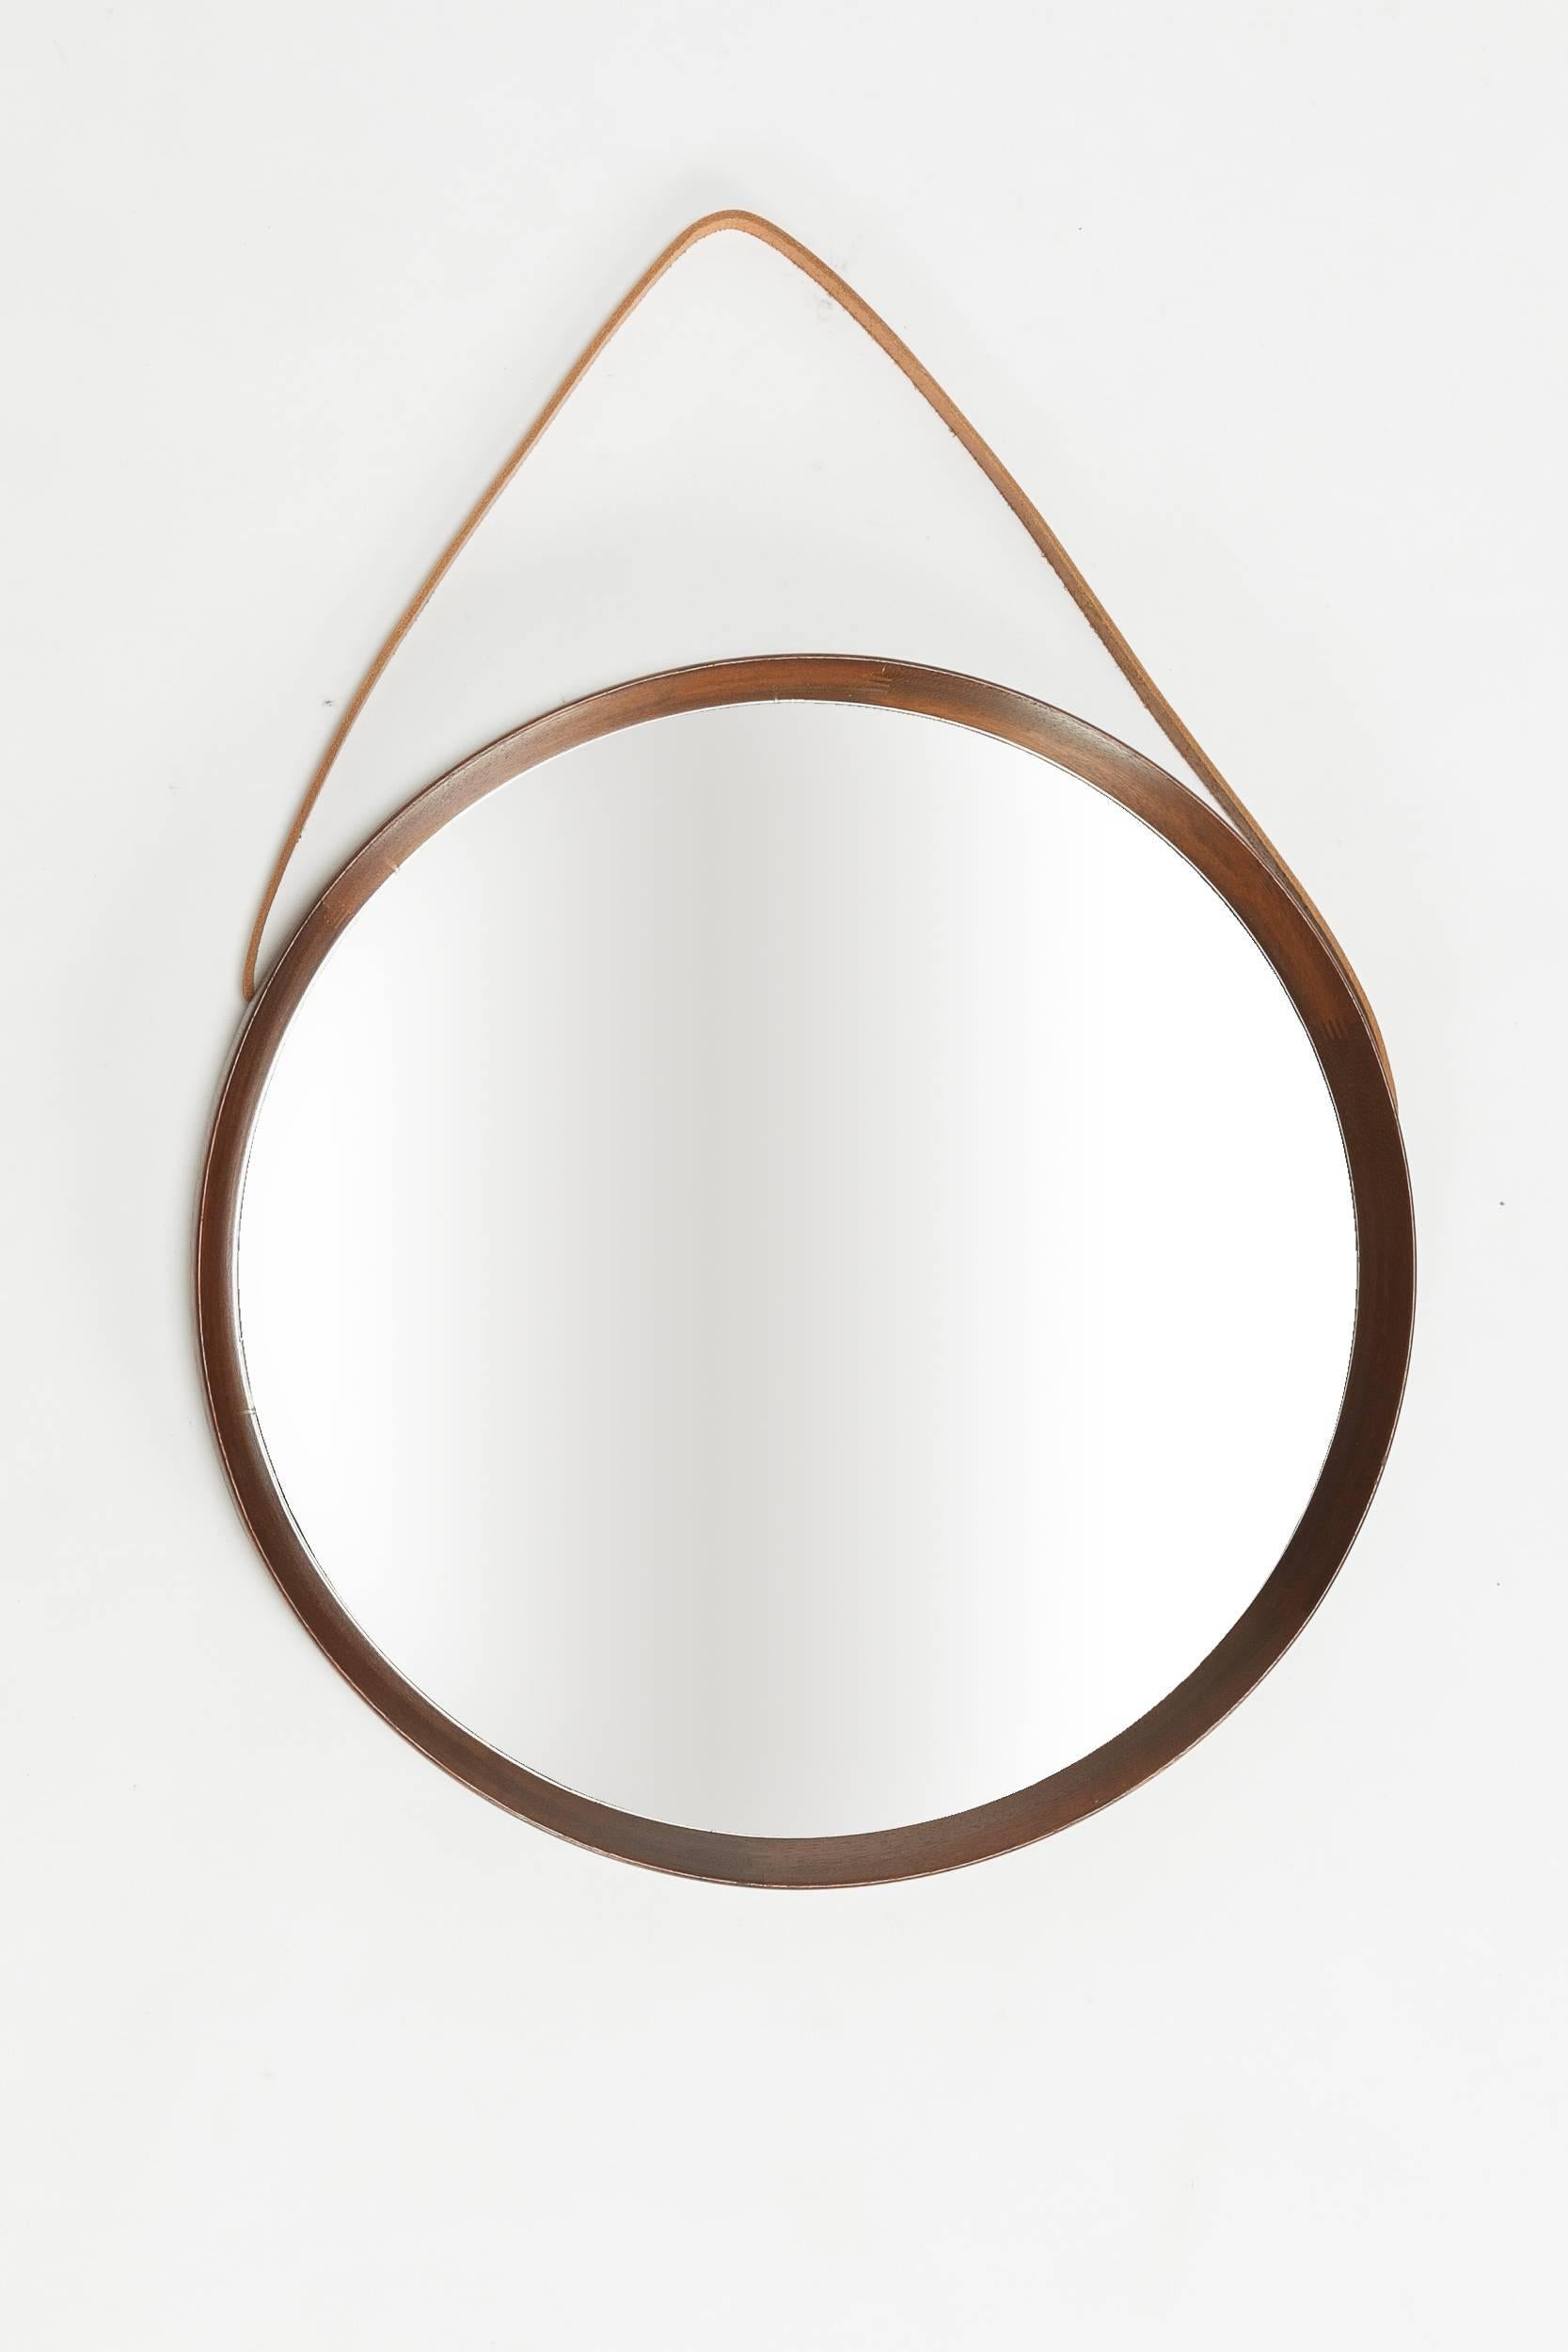 Stunning Swedish mirror designed by Uno & Östen Kristiansson and manufactured by Luxus Vittsjö in the 1960s. The mirror is bordered by a solid teak frame with a leather strap to wall mount.